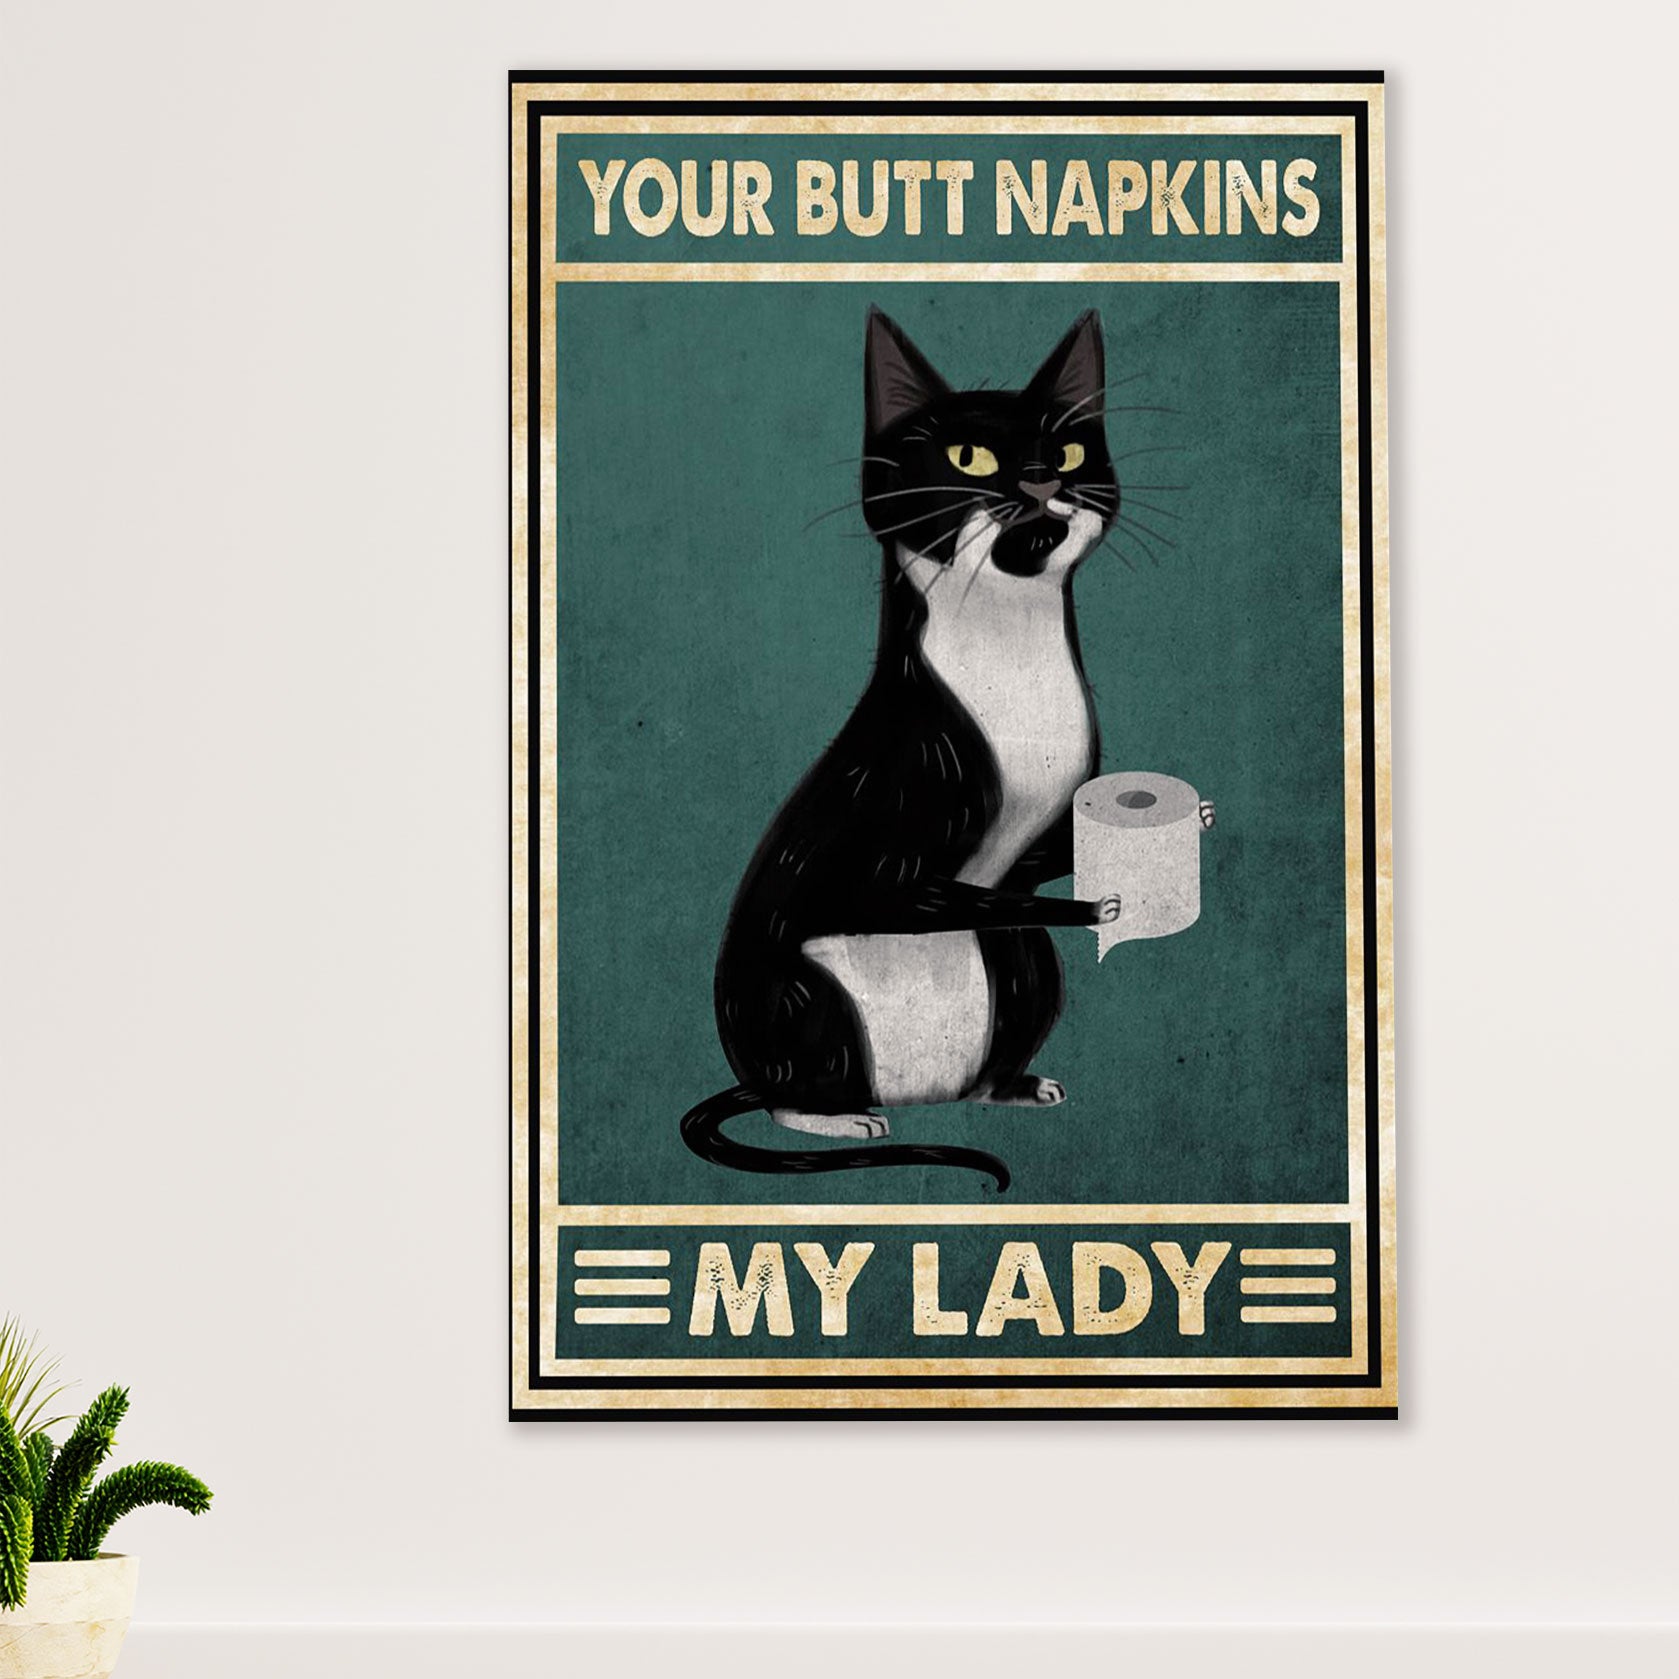 Cute Cat Canvas Prints | Funny Cat Toilet Paper | Wall Art Gift for Cat Kitties Lover